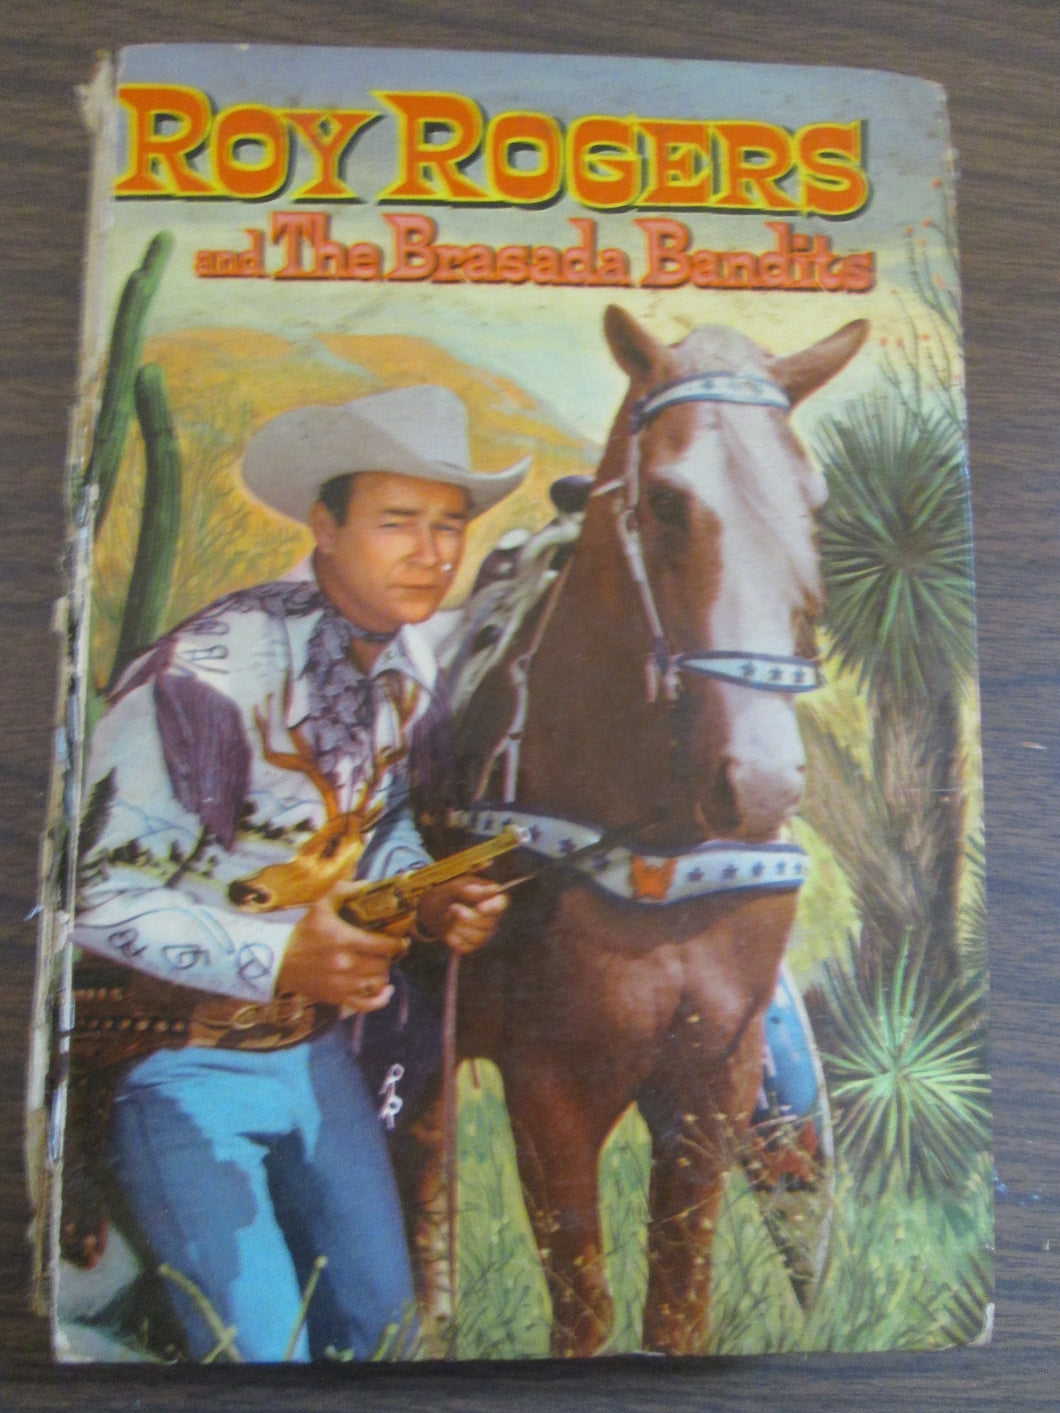 Roy Rogers and The Brasada Bandits TV Adventure Book by Cole Fannin HC 1955